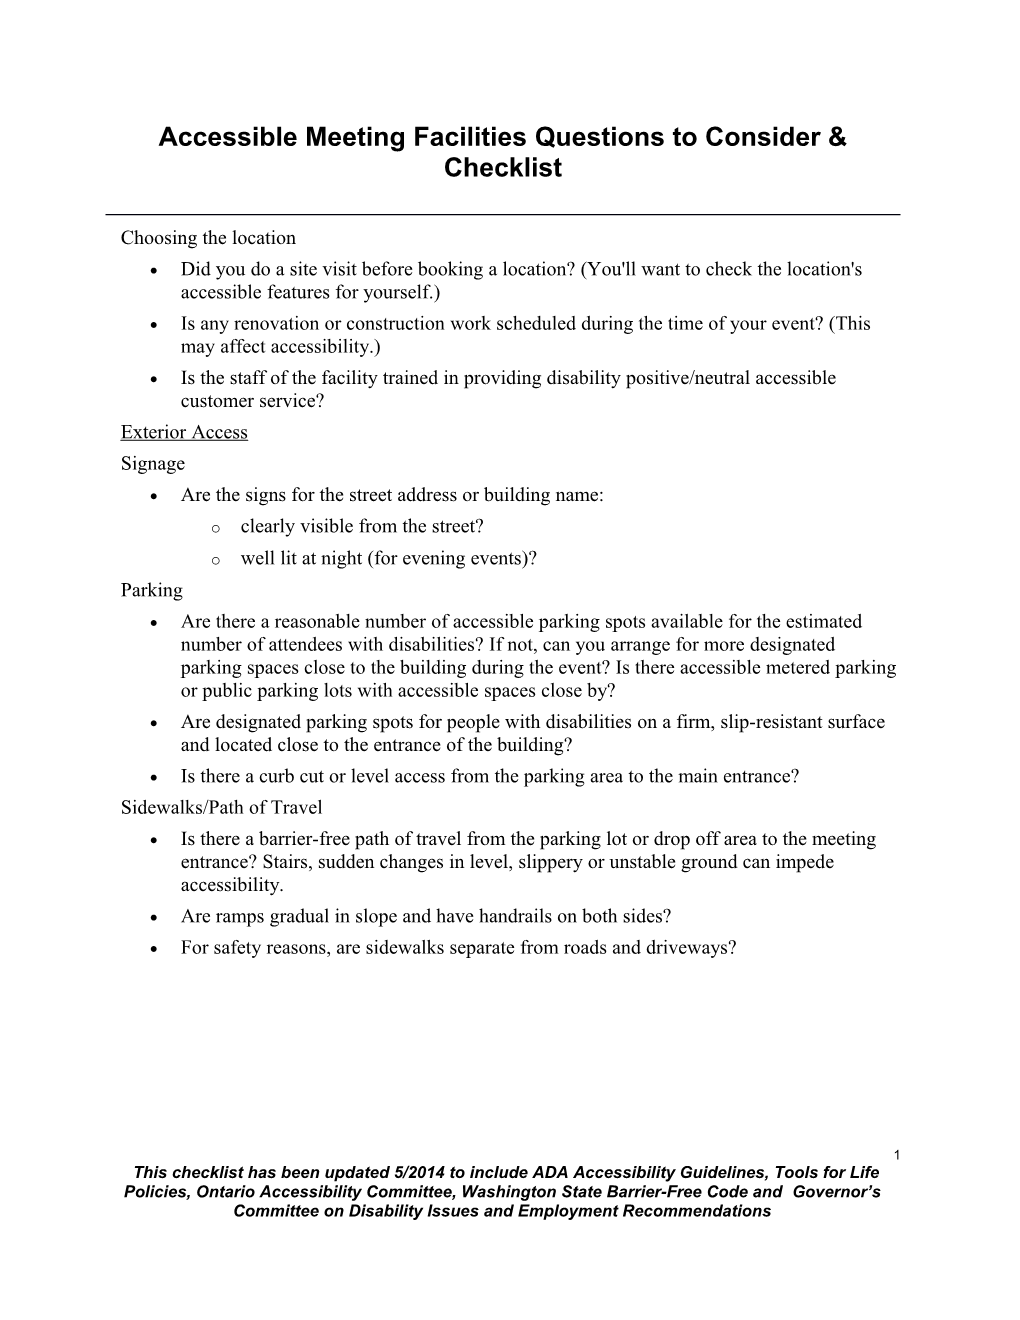 Accessible Meeting Facilities Questions to Consider & Checklist